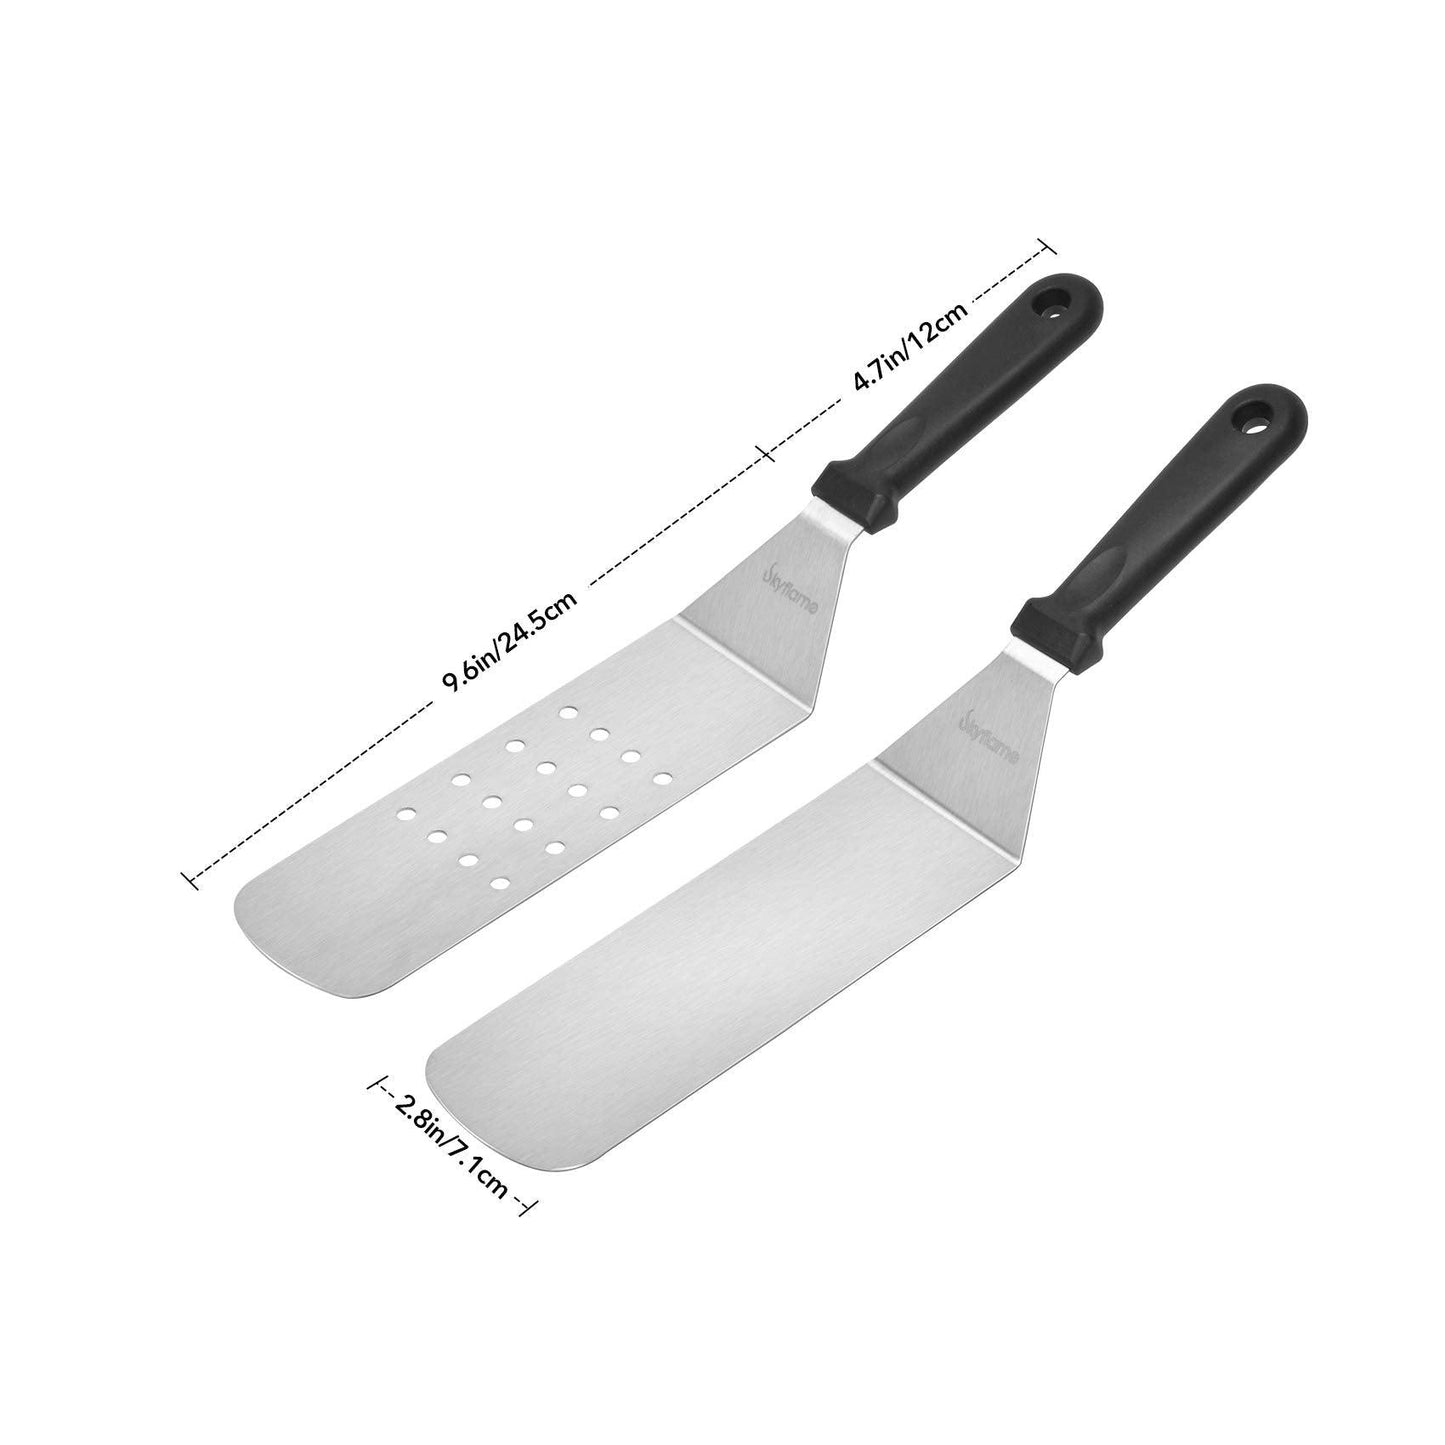 Skyflame 3 Piece Griddle Accessories Kit, Stainless Steel Professional Long BBQ Grill Spatula/Turner & Scraper Set for Flat Top Grill Hibachi Camping Cooking - CookCave